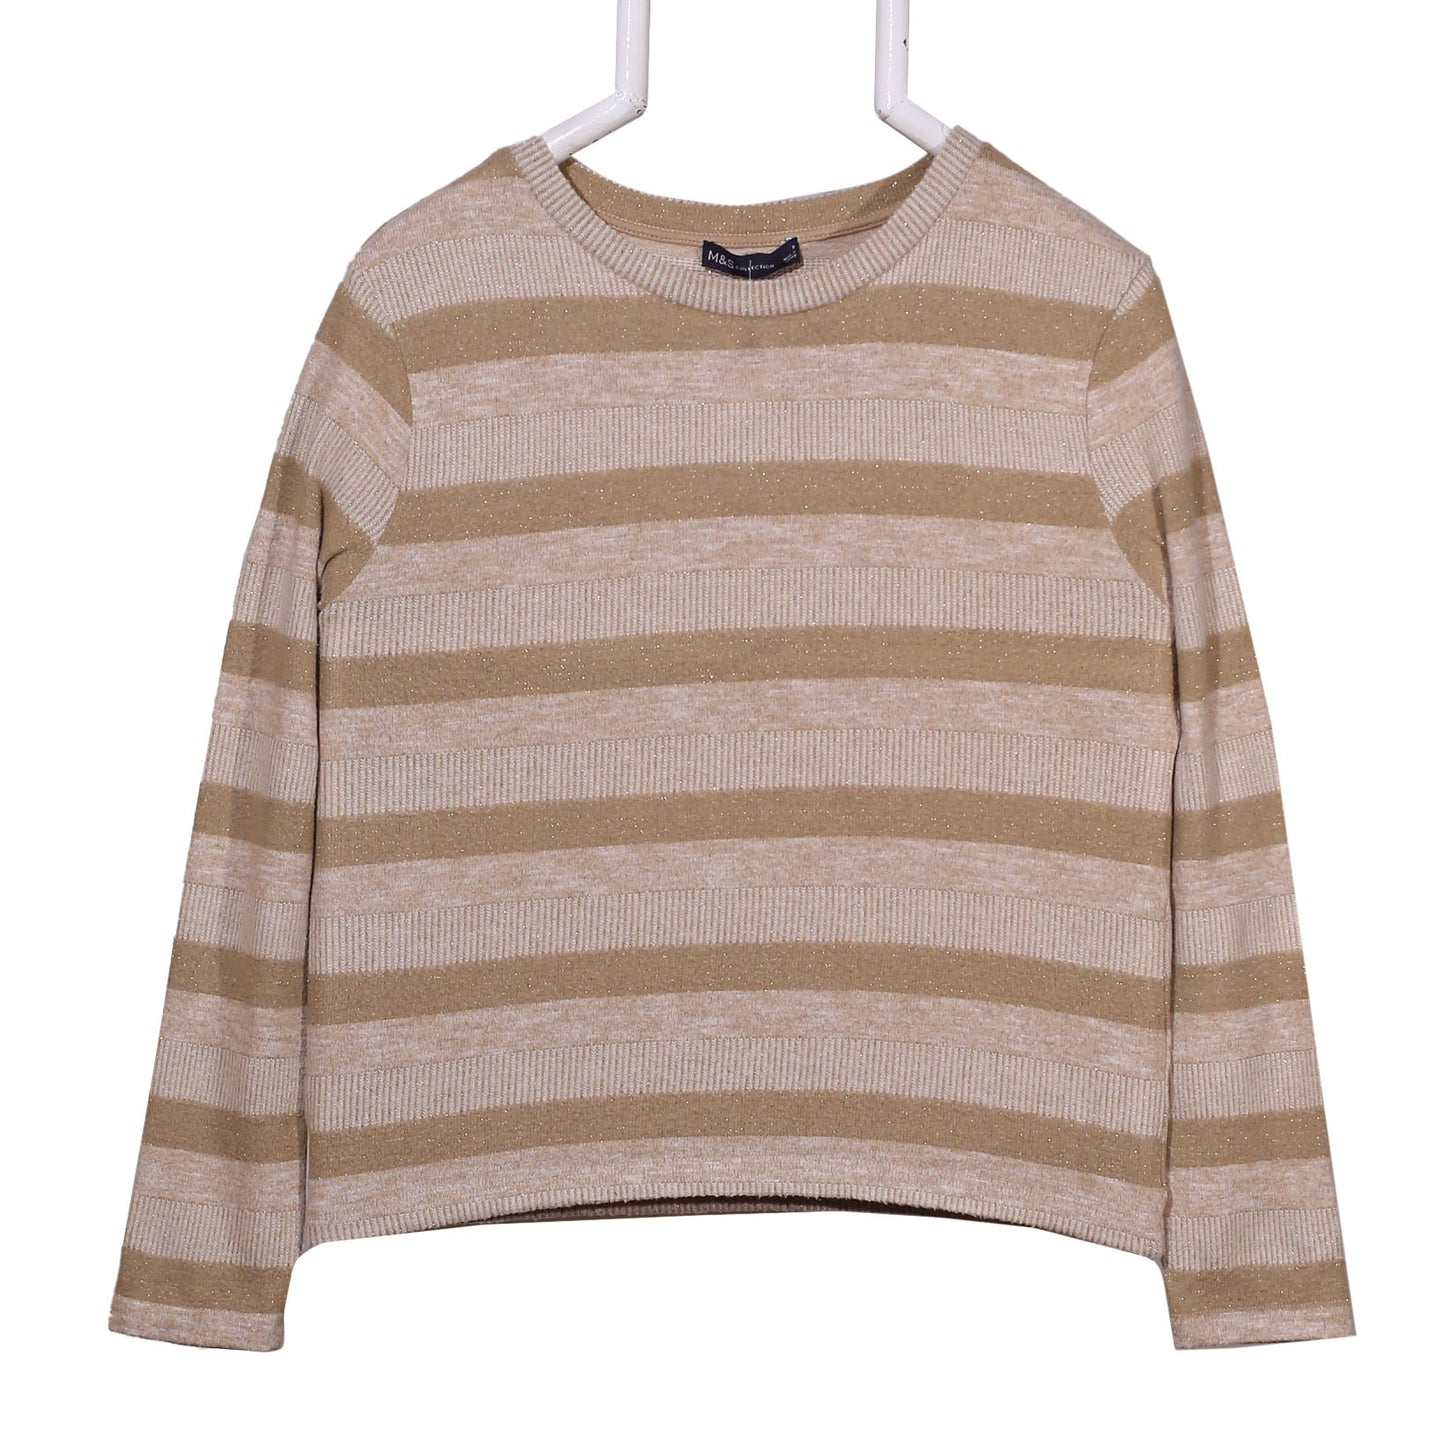 M&S COLLECTION SWEATER